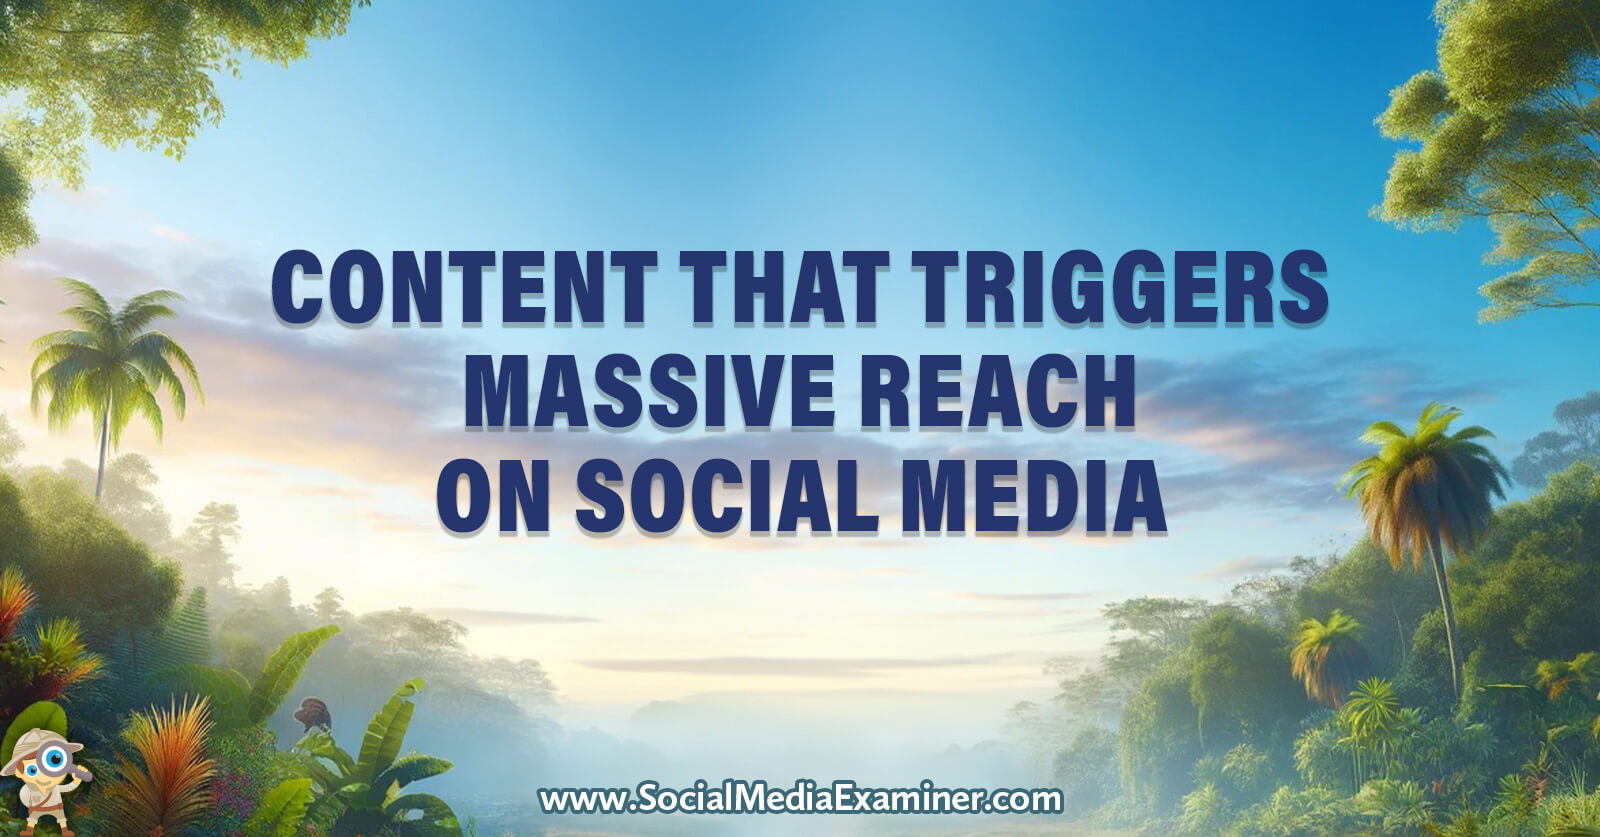 Content That Triggers Massive Reach on Social Media by Social Media Examiner